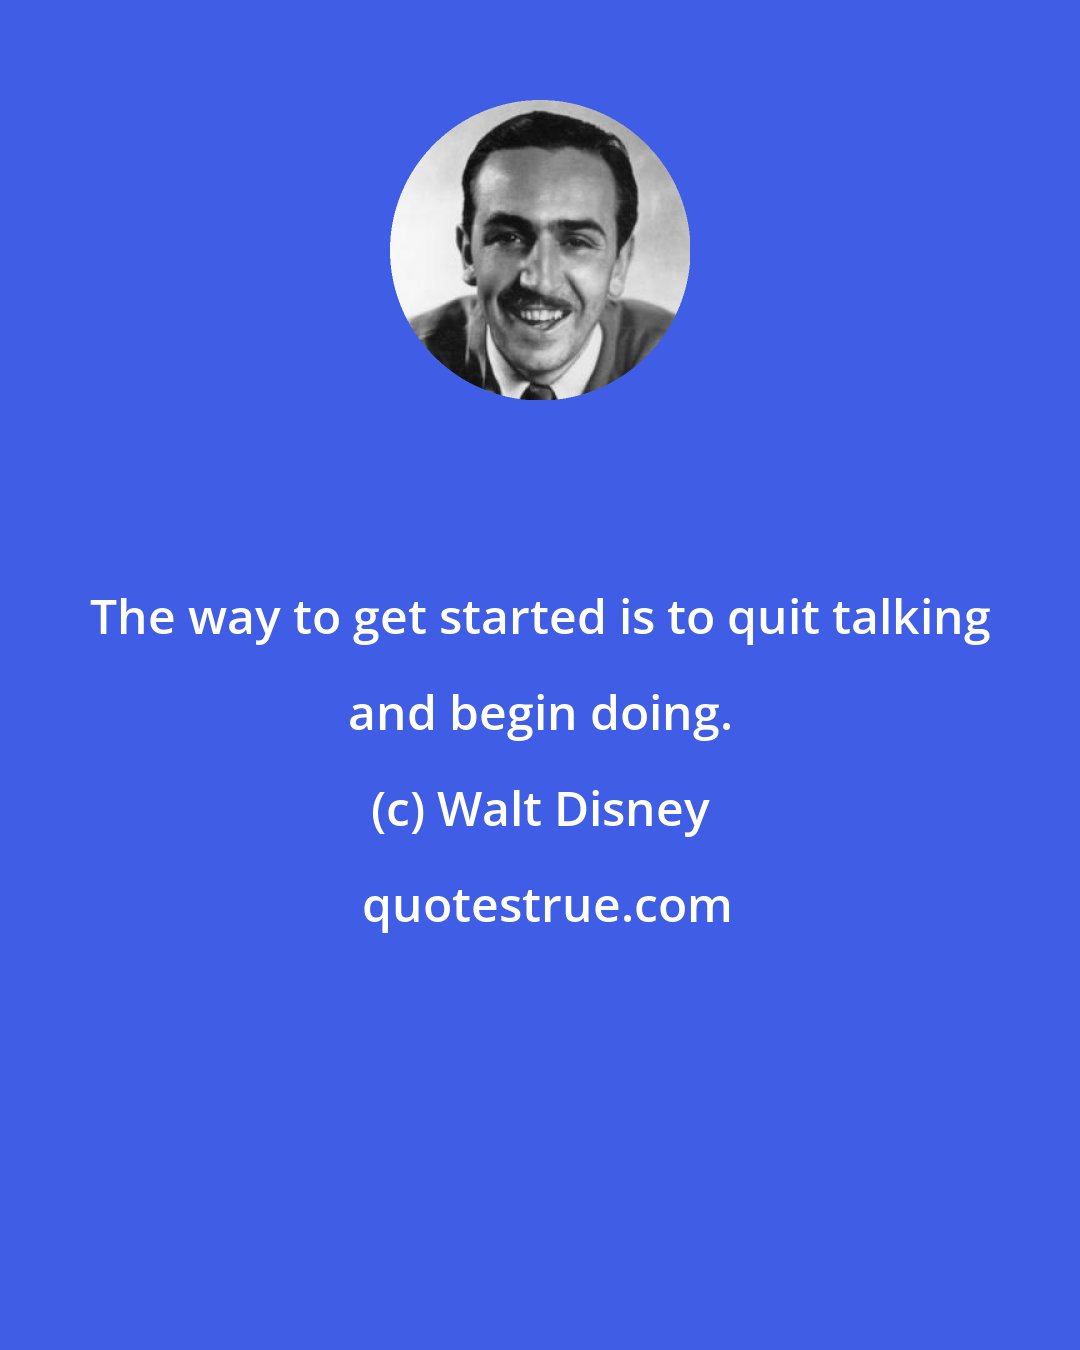 Walt Disney: The way to get started is to quit talking and begin doing.